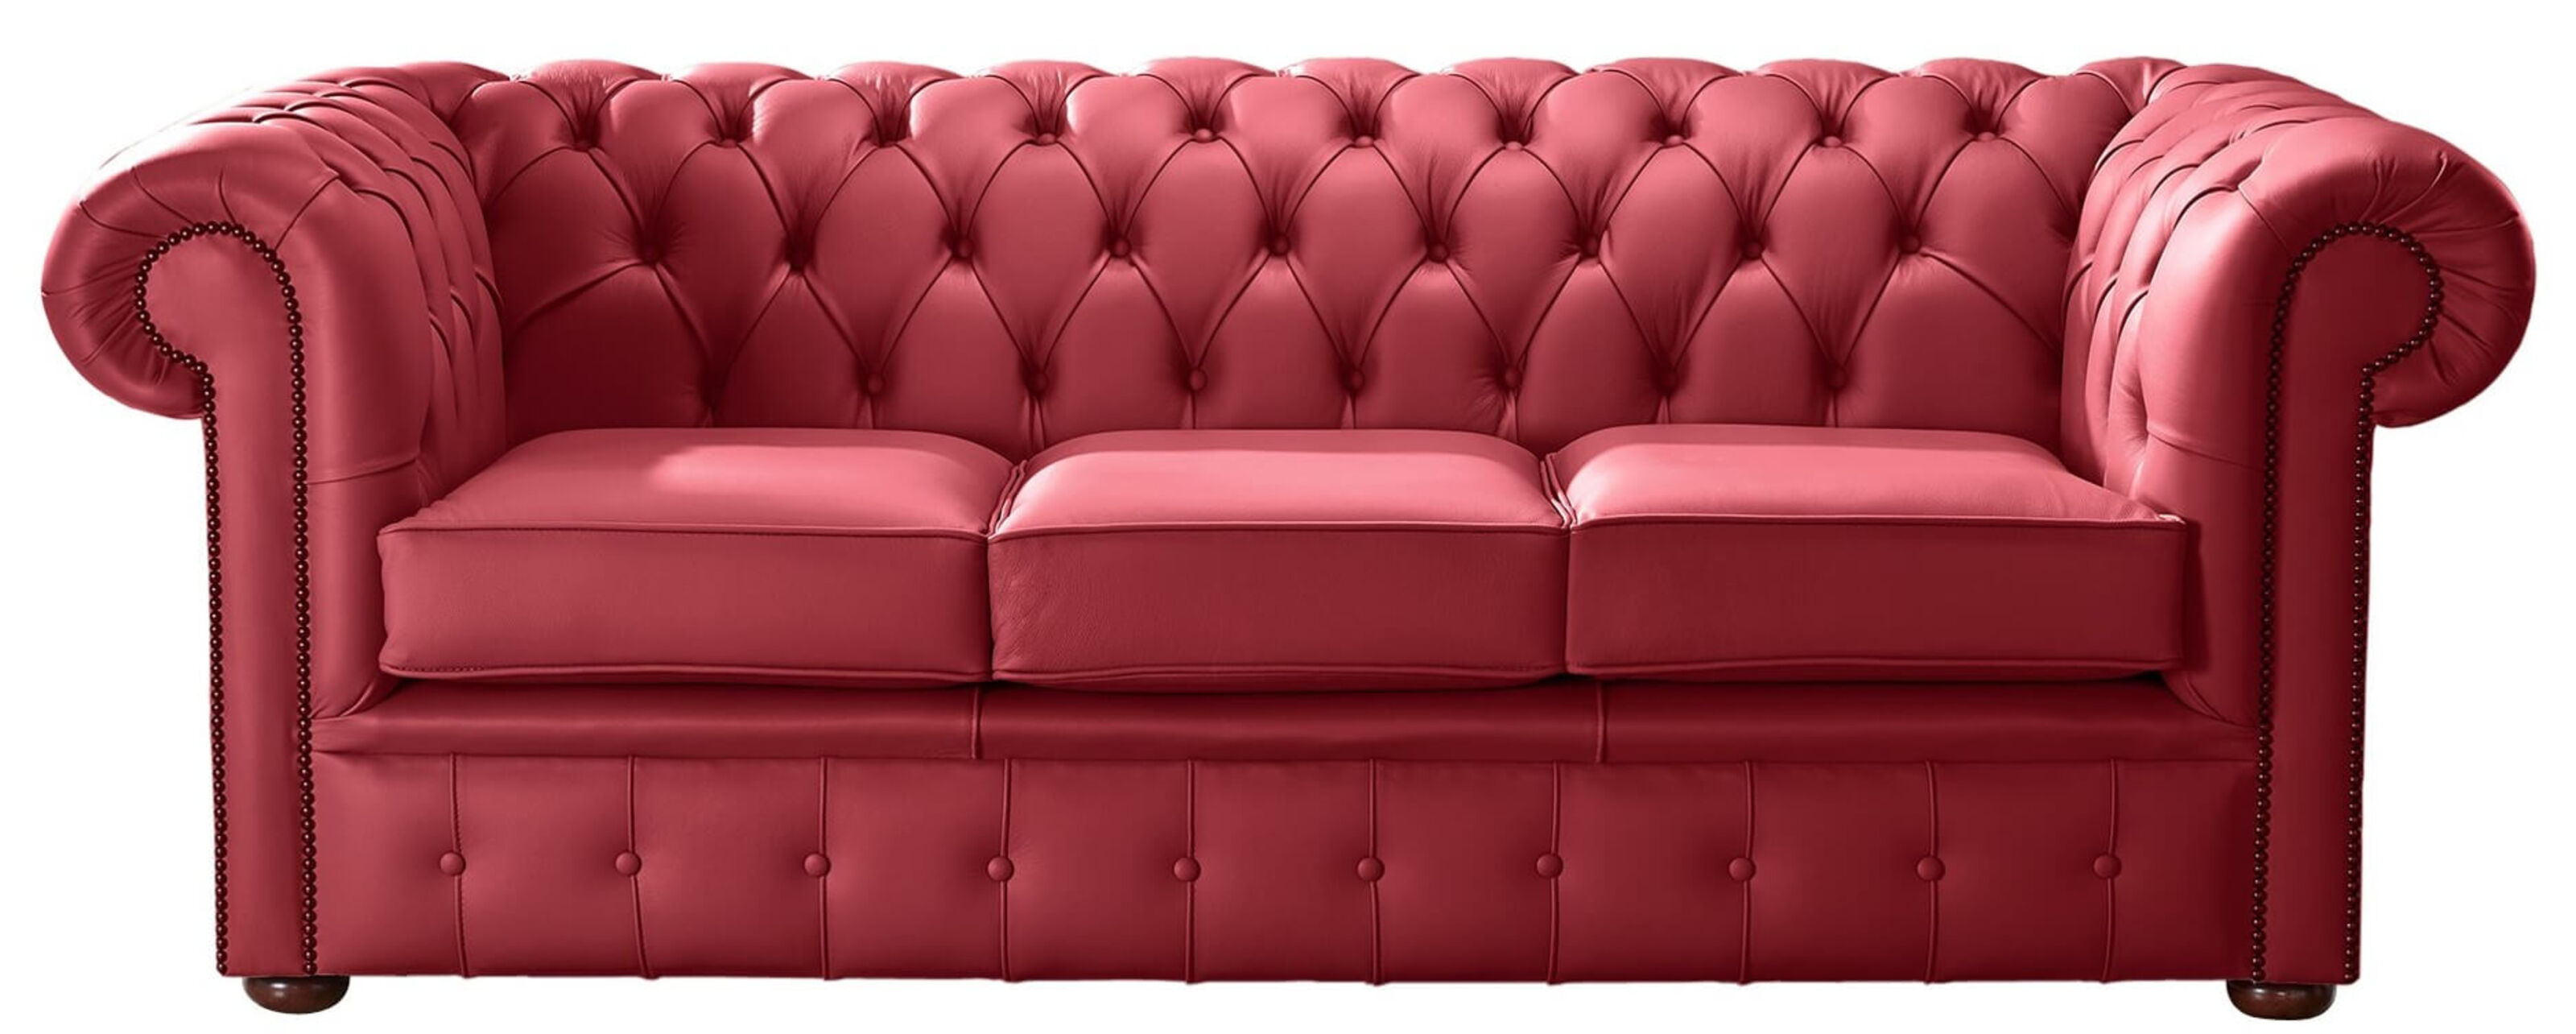 Diverse Designs Exploring Varieties of Chesterfield Sofas  %Post Title